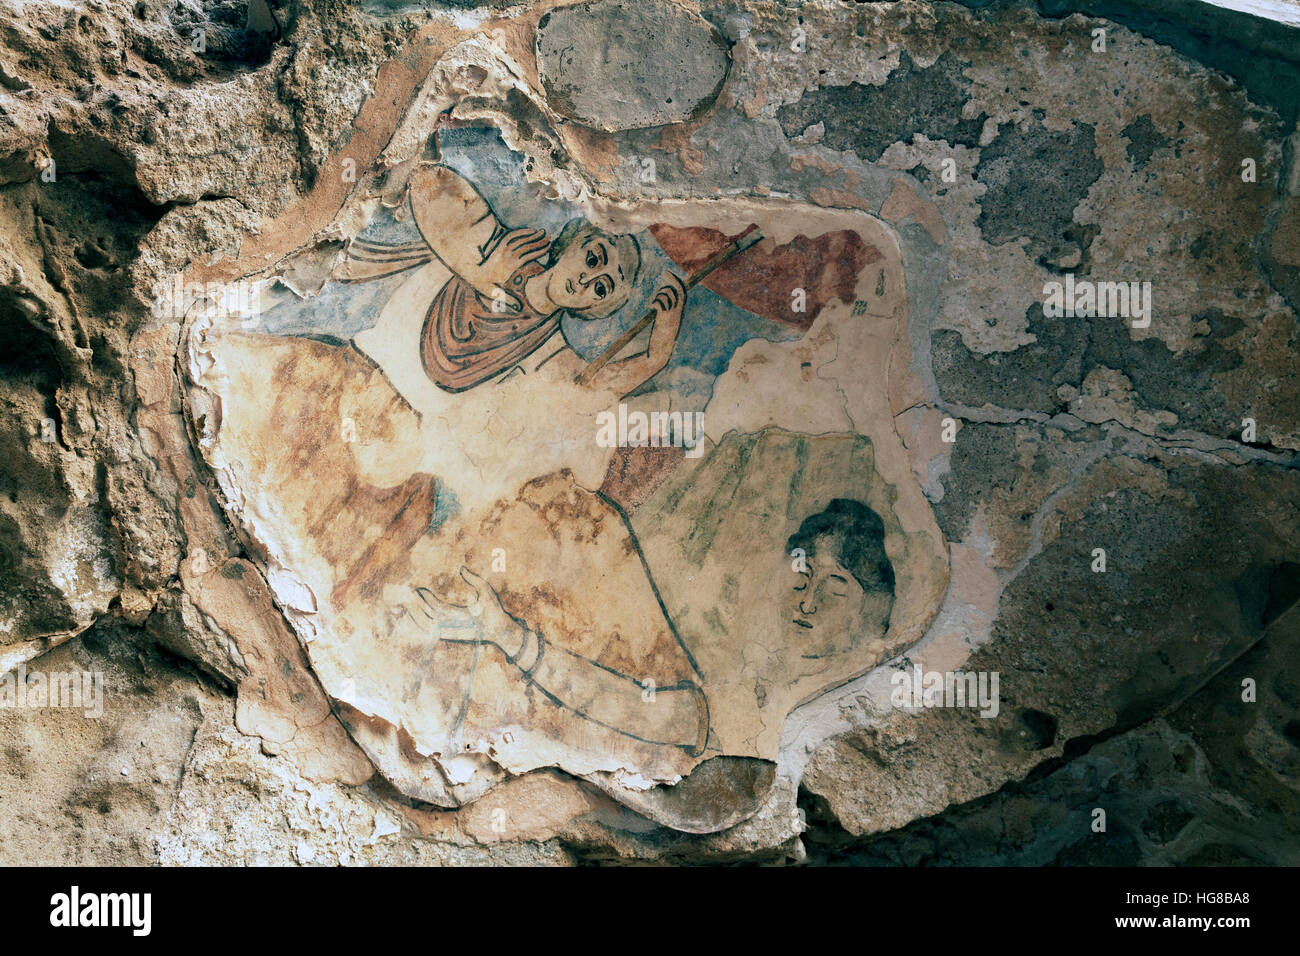 Ceiling paintings, antique archeological site, ancient city of Salamis, Famagusta, Northern Cyprus, Cyprus Stock Photo